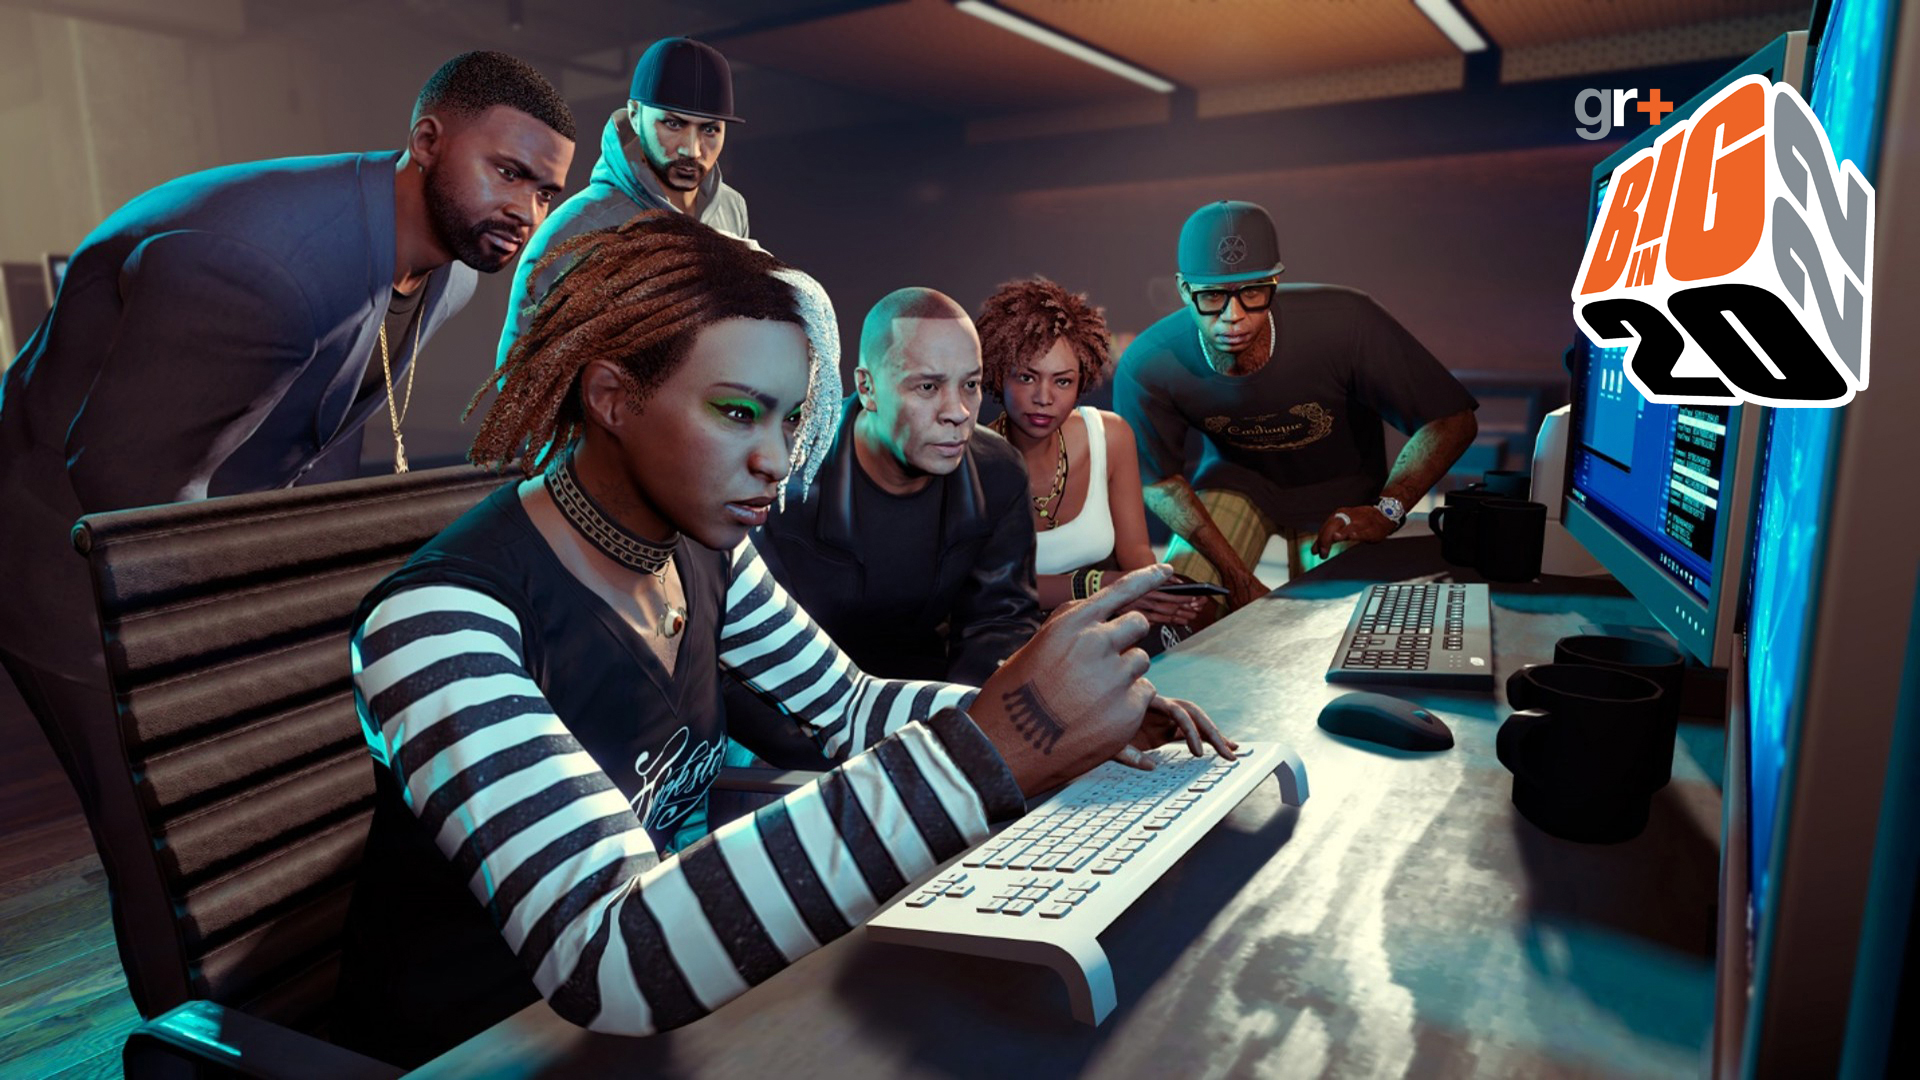 GTA 5 Online is Now Safe to Play on PC Again